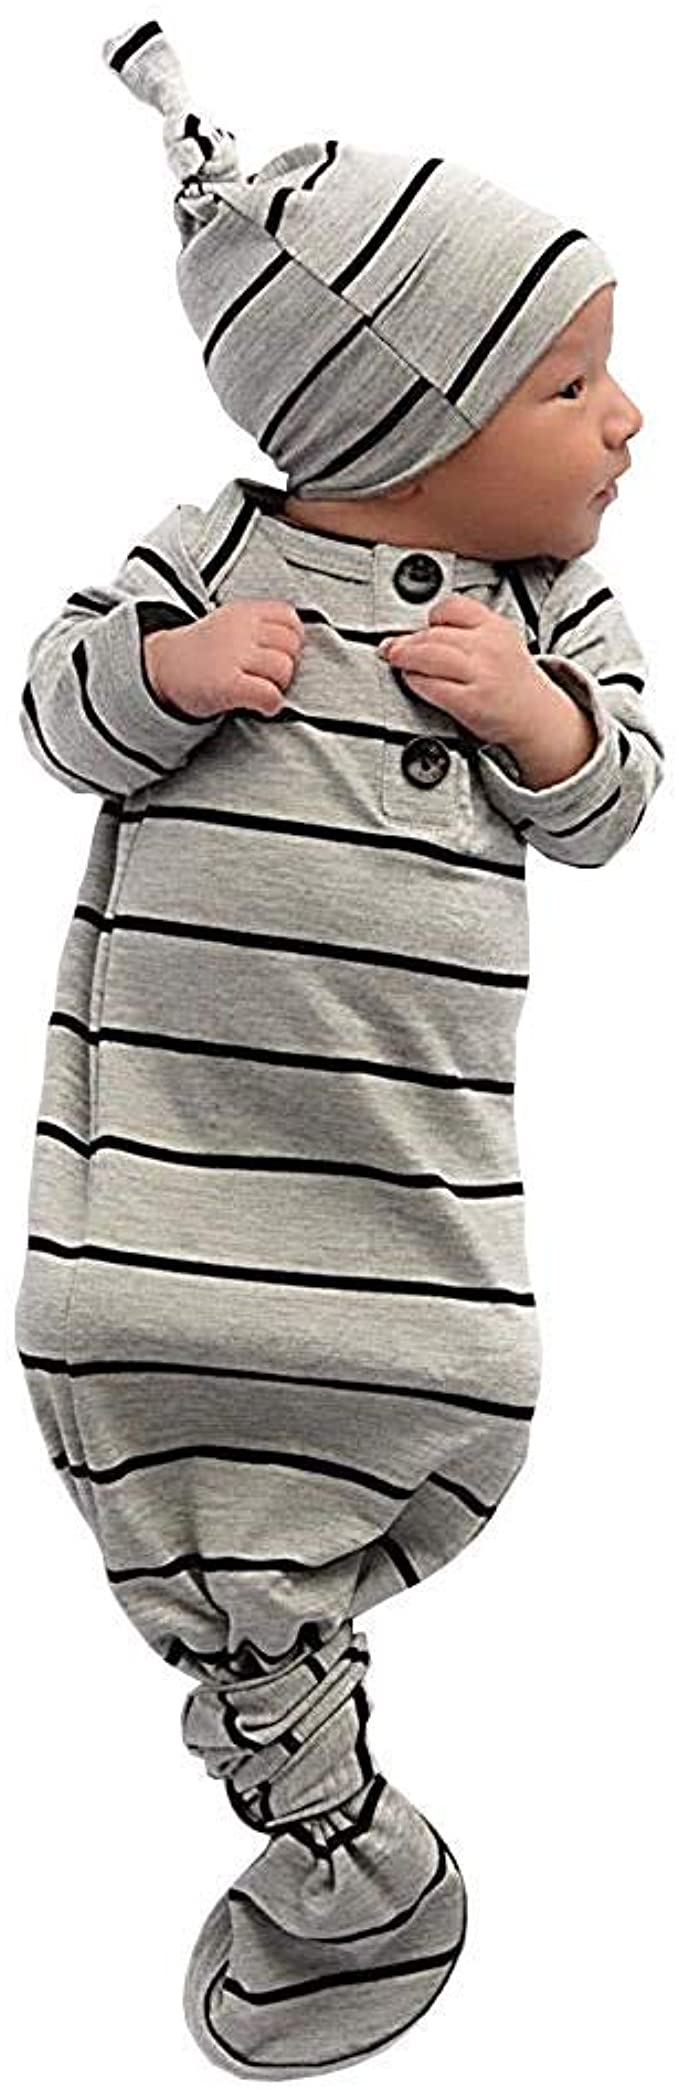 TROSJ Unisex Baby Striped Cotton Sleeper Gowns with Cap Long Knotted Sleeping Bag